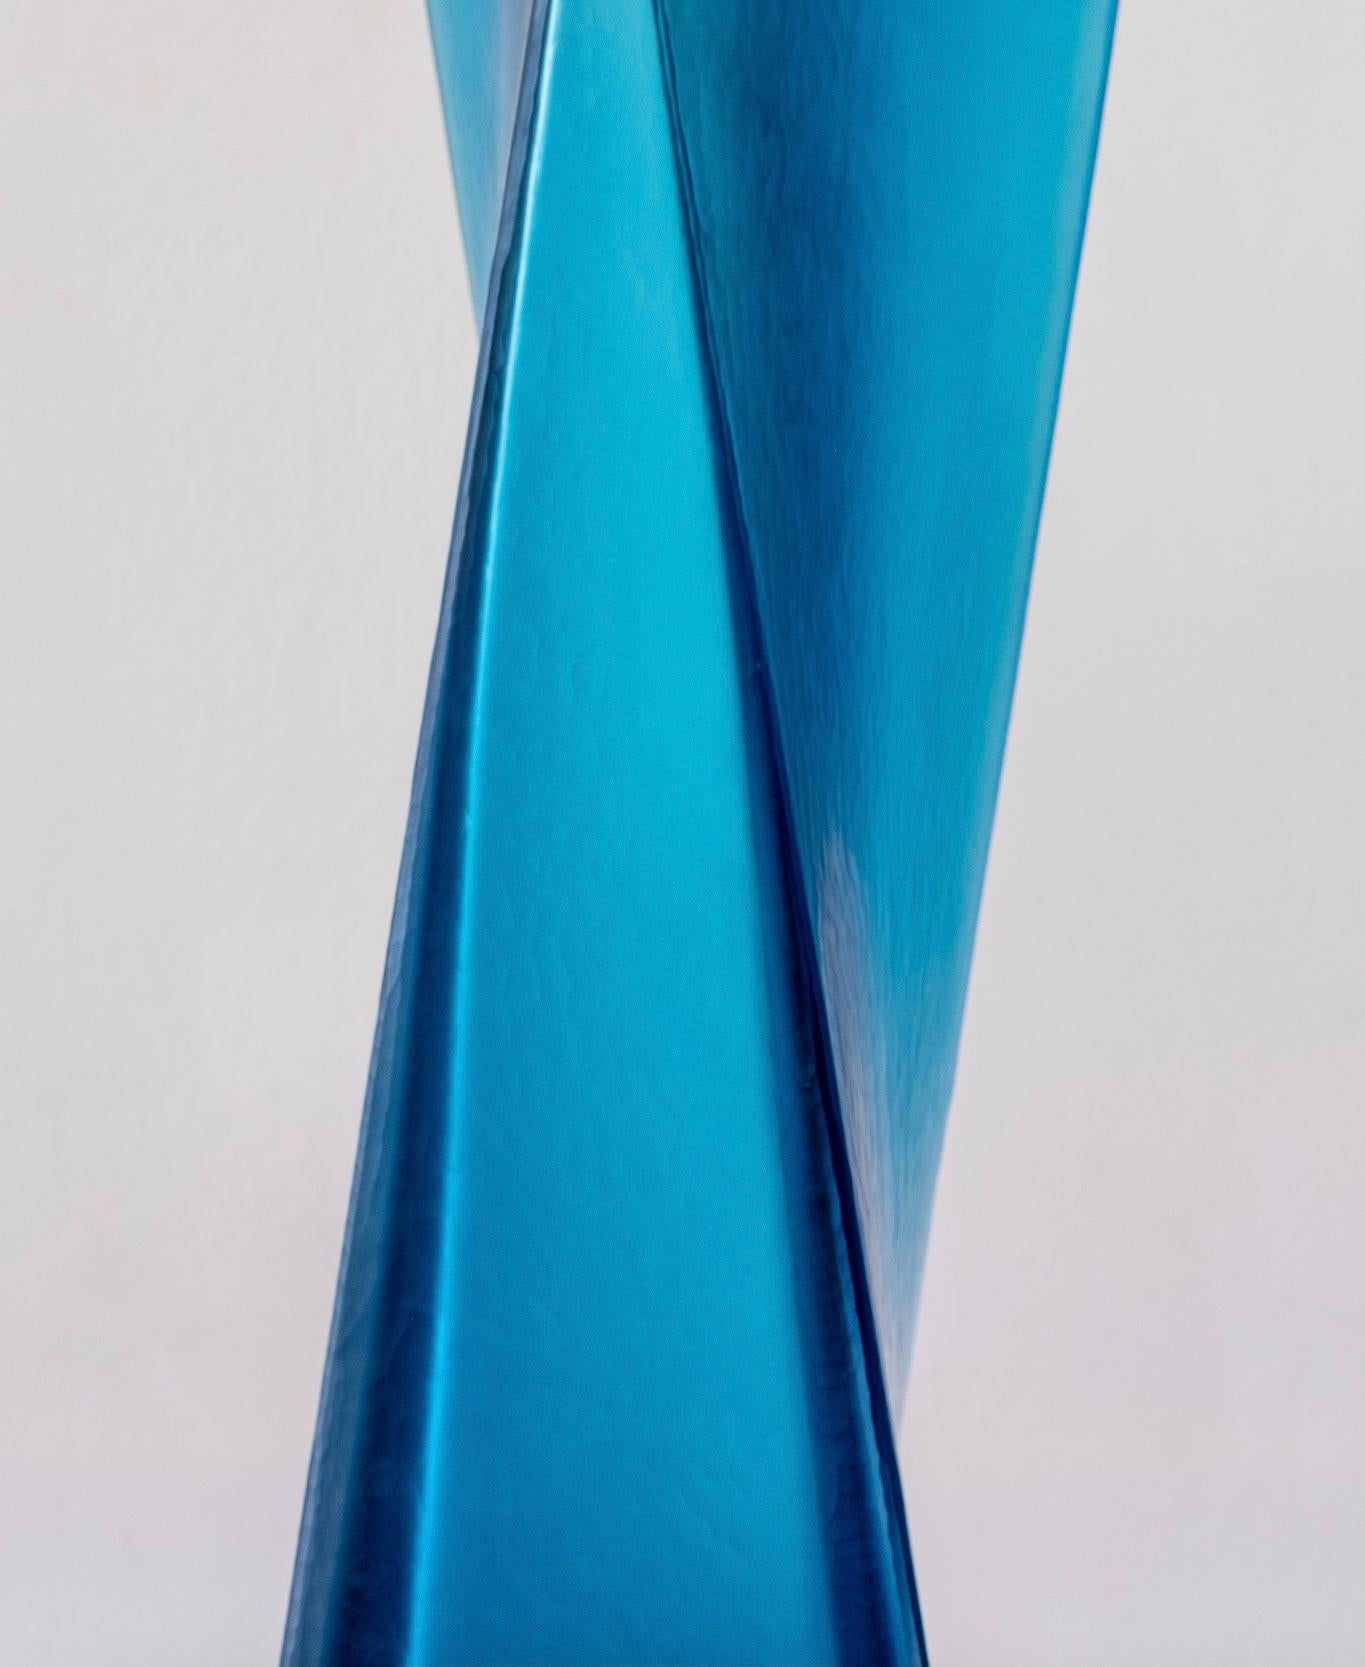 Japanese Limited Edition Set of 3 Monumental Murano Glass Vases by Tadao Ando For Sale